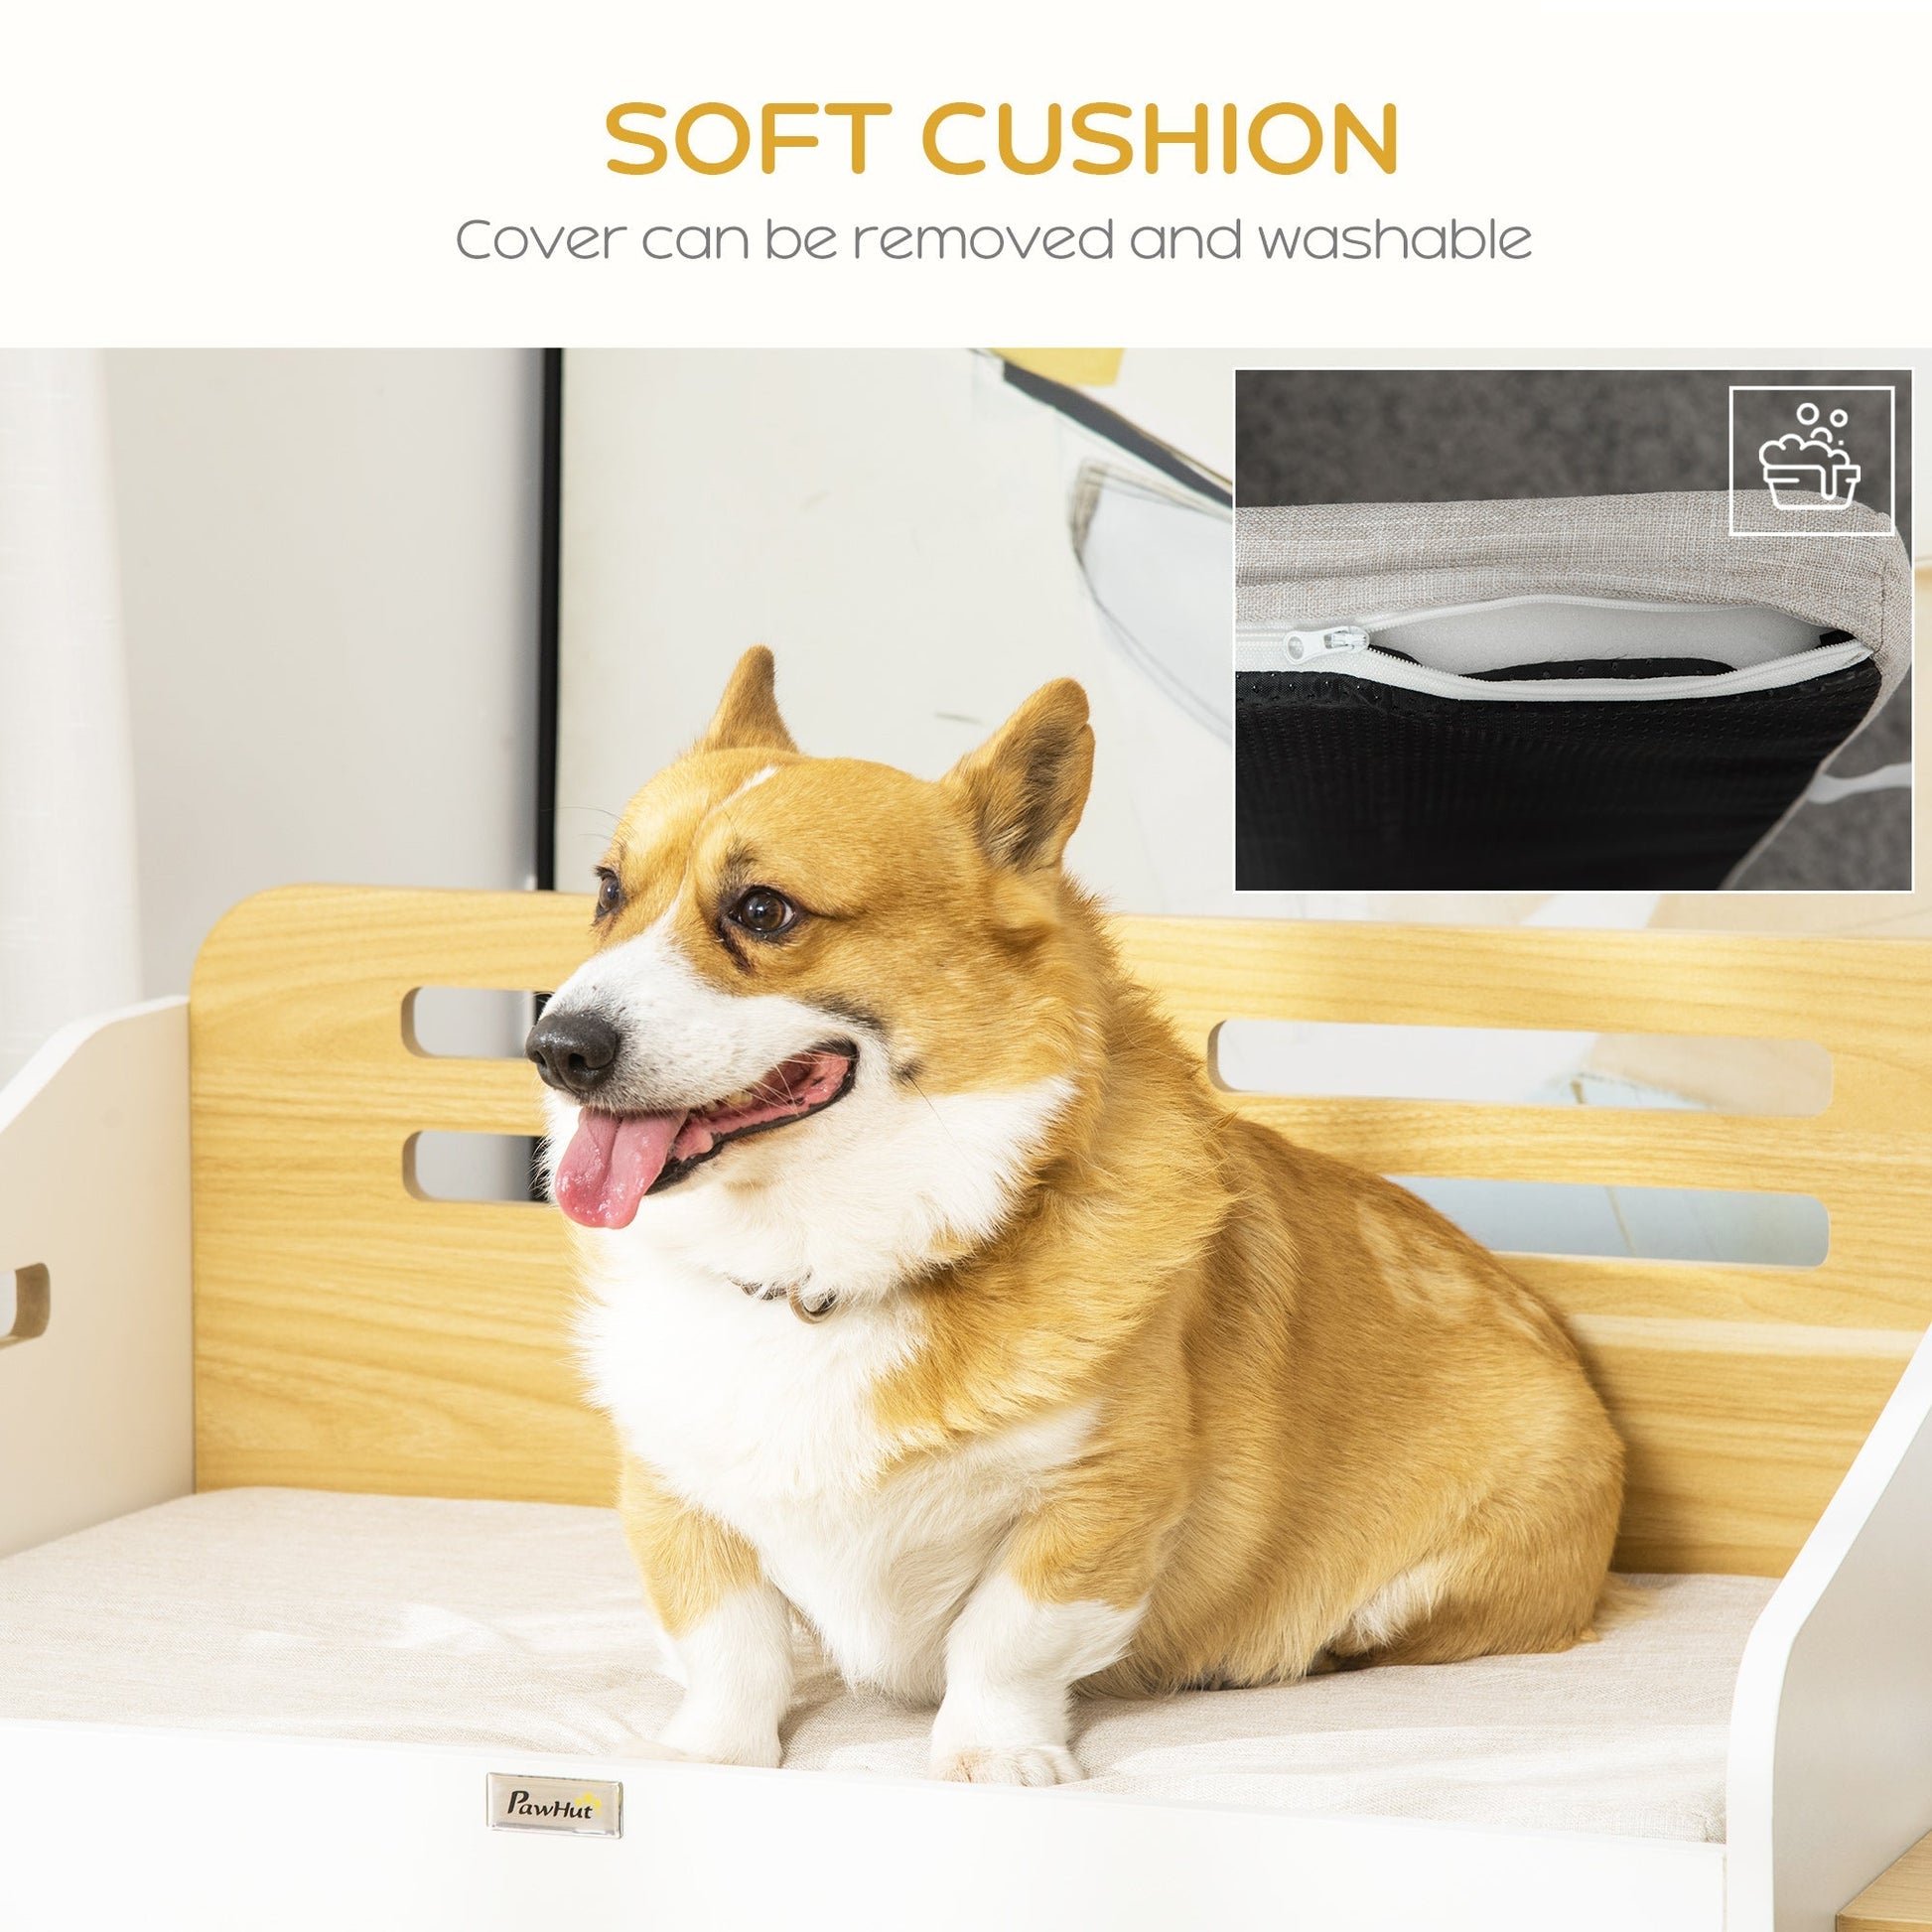 Modern Dog Bed Frame, Furniture Style Pet Sofa, Cat Couch, with Soft Cushion, Washable Cover, 2 Feeding Bowls, Handles, for Small and Medium Sized Dog - Gallery Canada